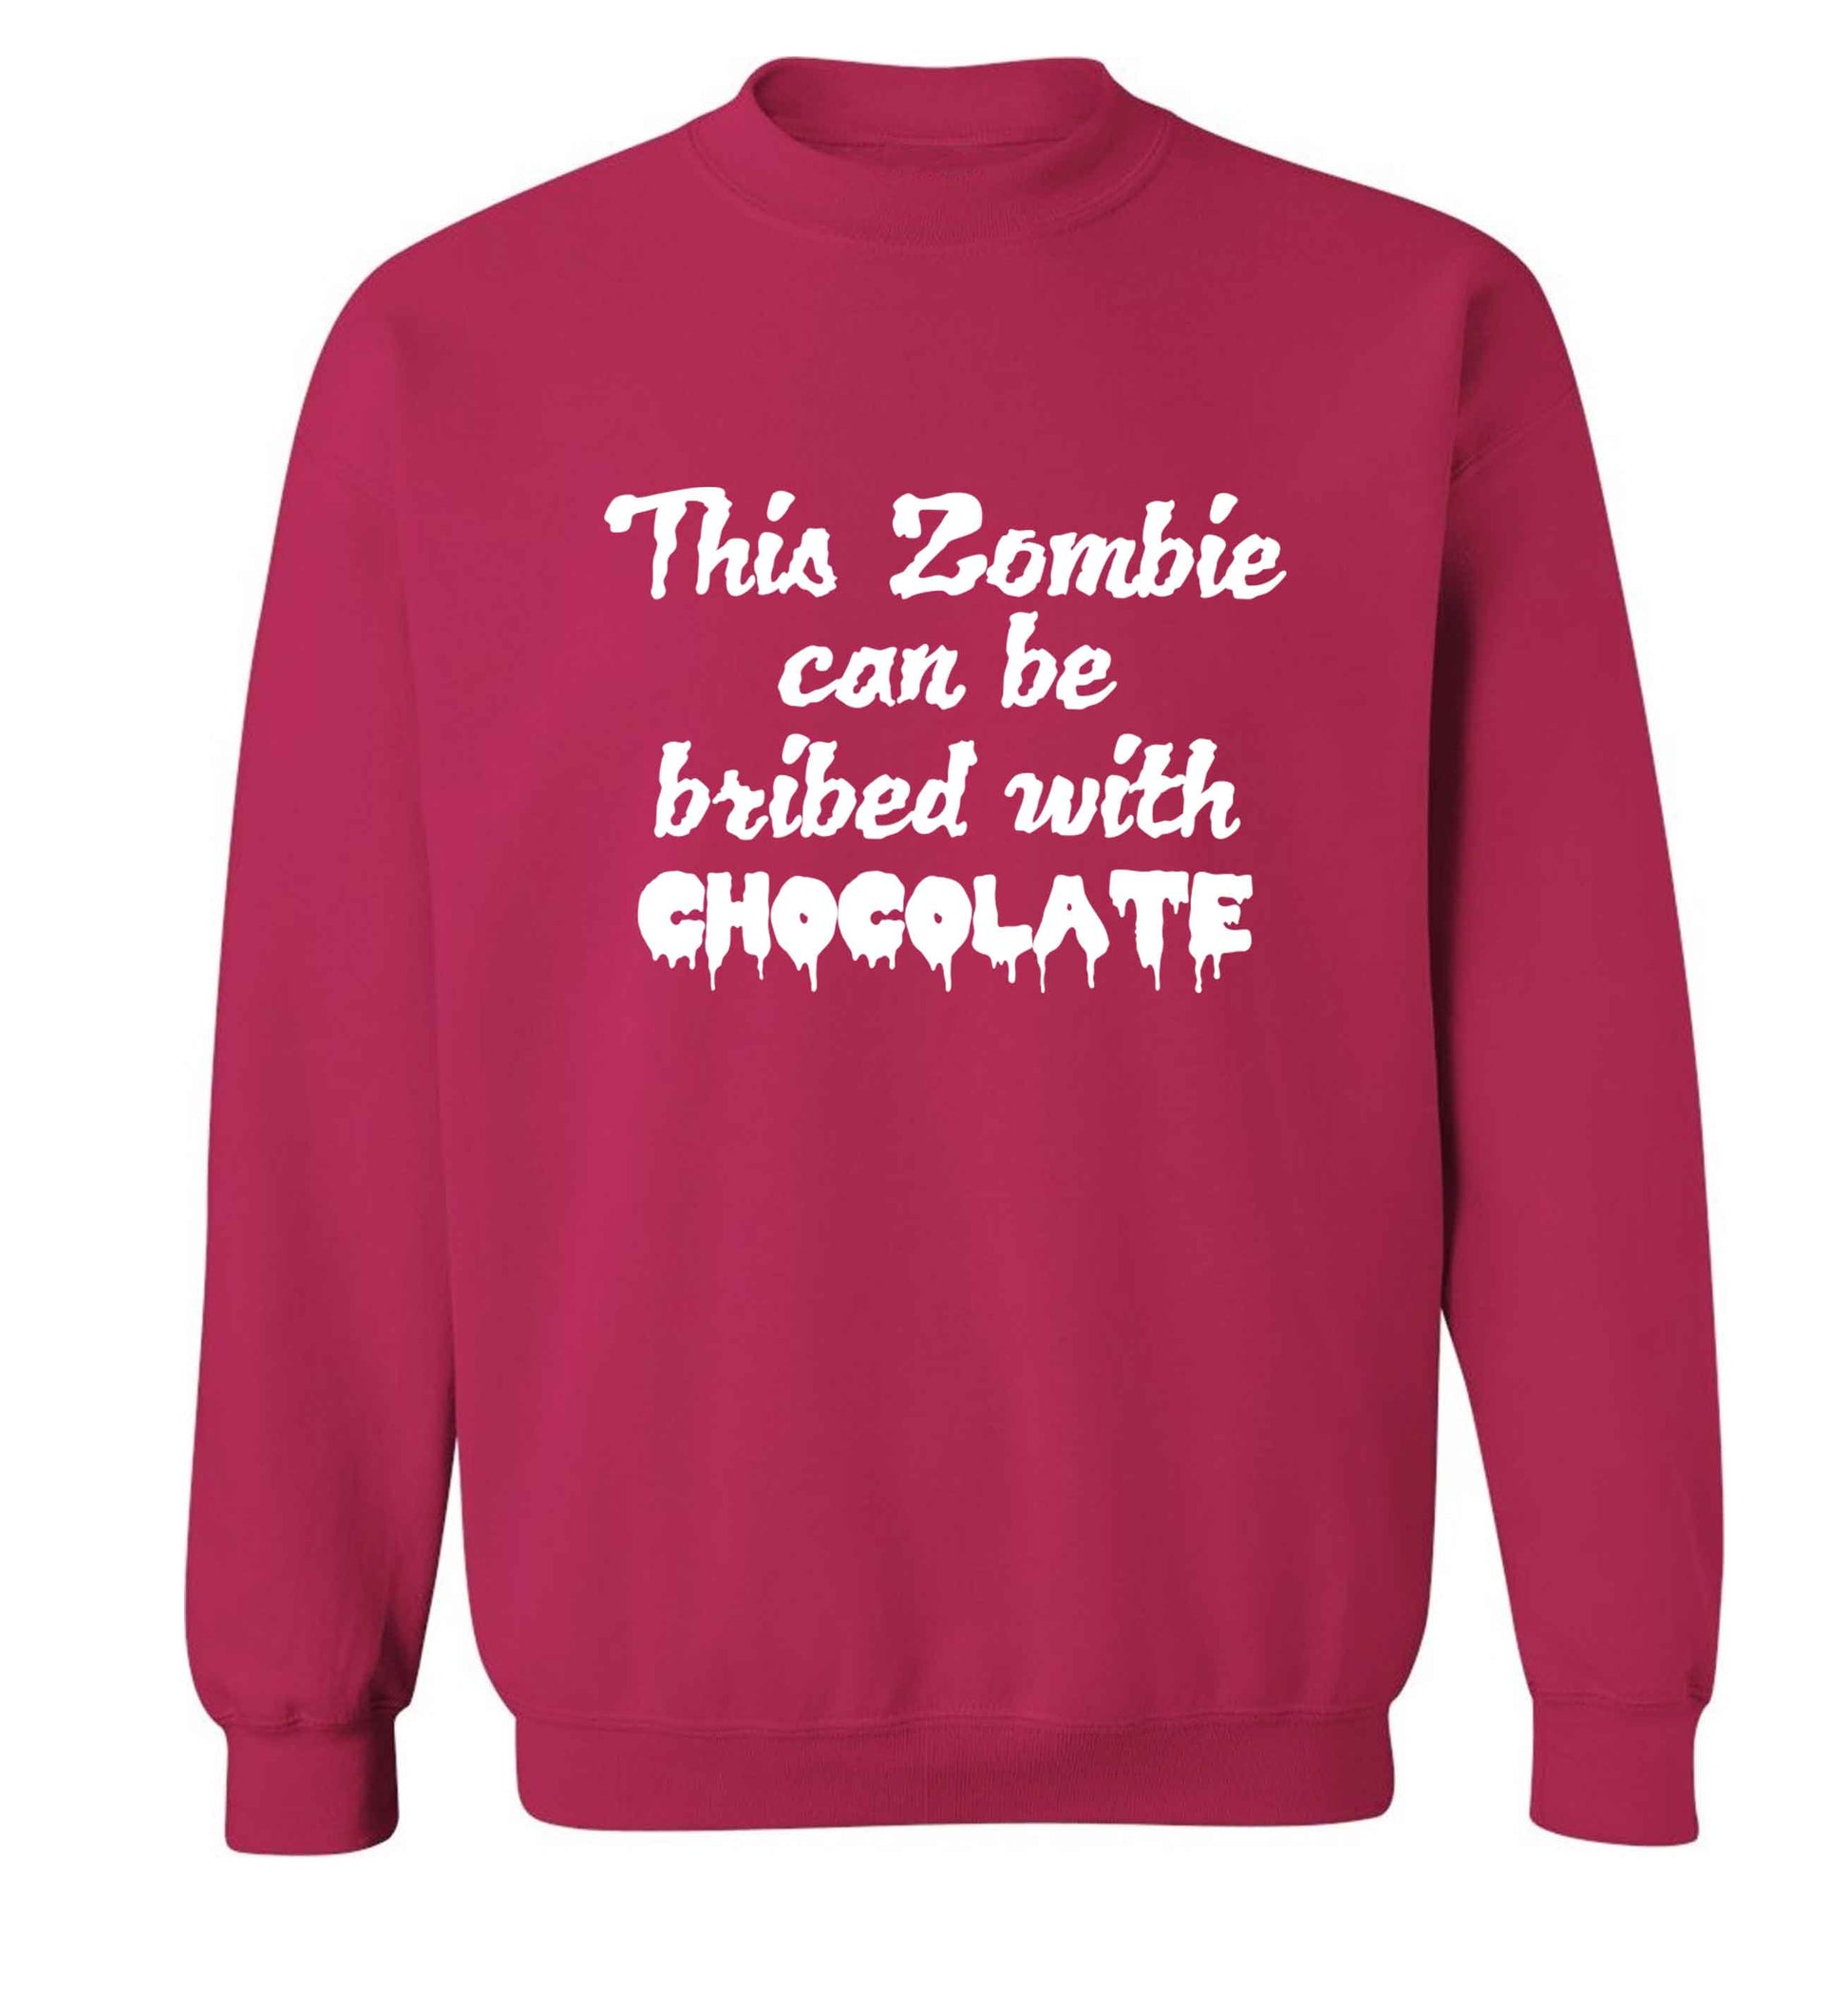 This zombie can be bribed with chocolate adult's unisex pink sweater 2XL